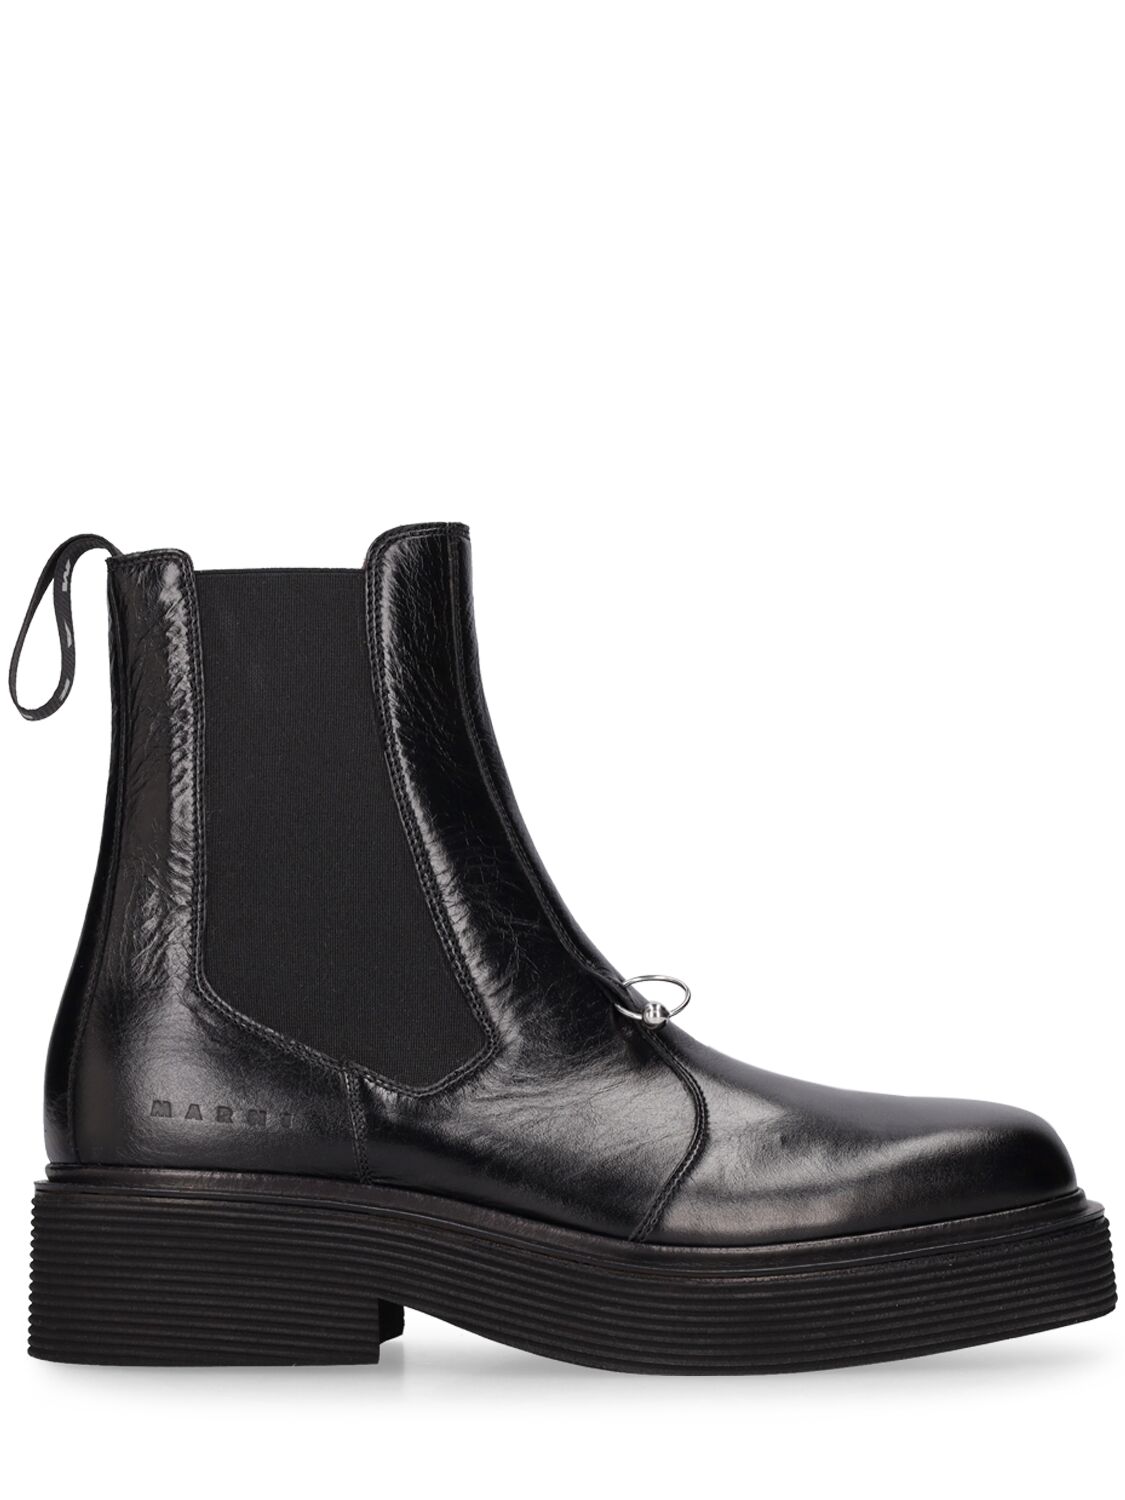 MARNI NEW FOREST SHINY LEATHER CHELSEA BOOTS